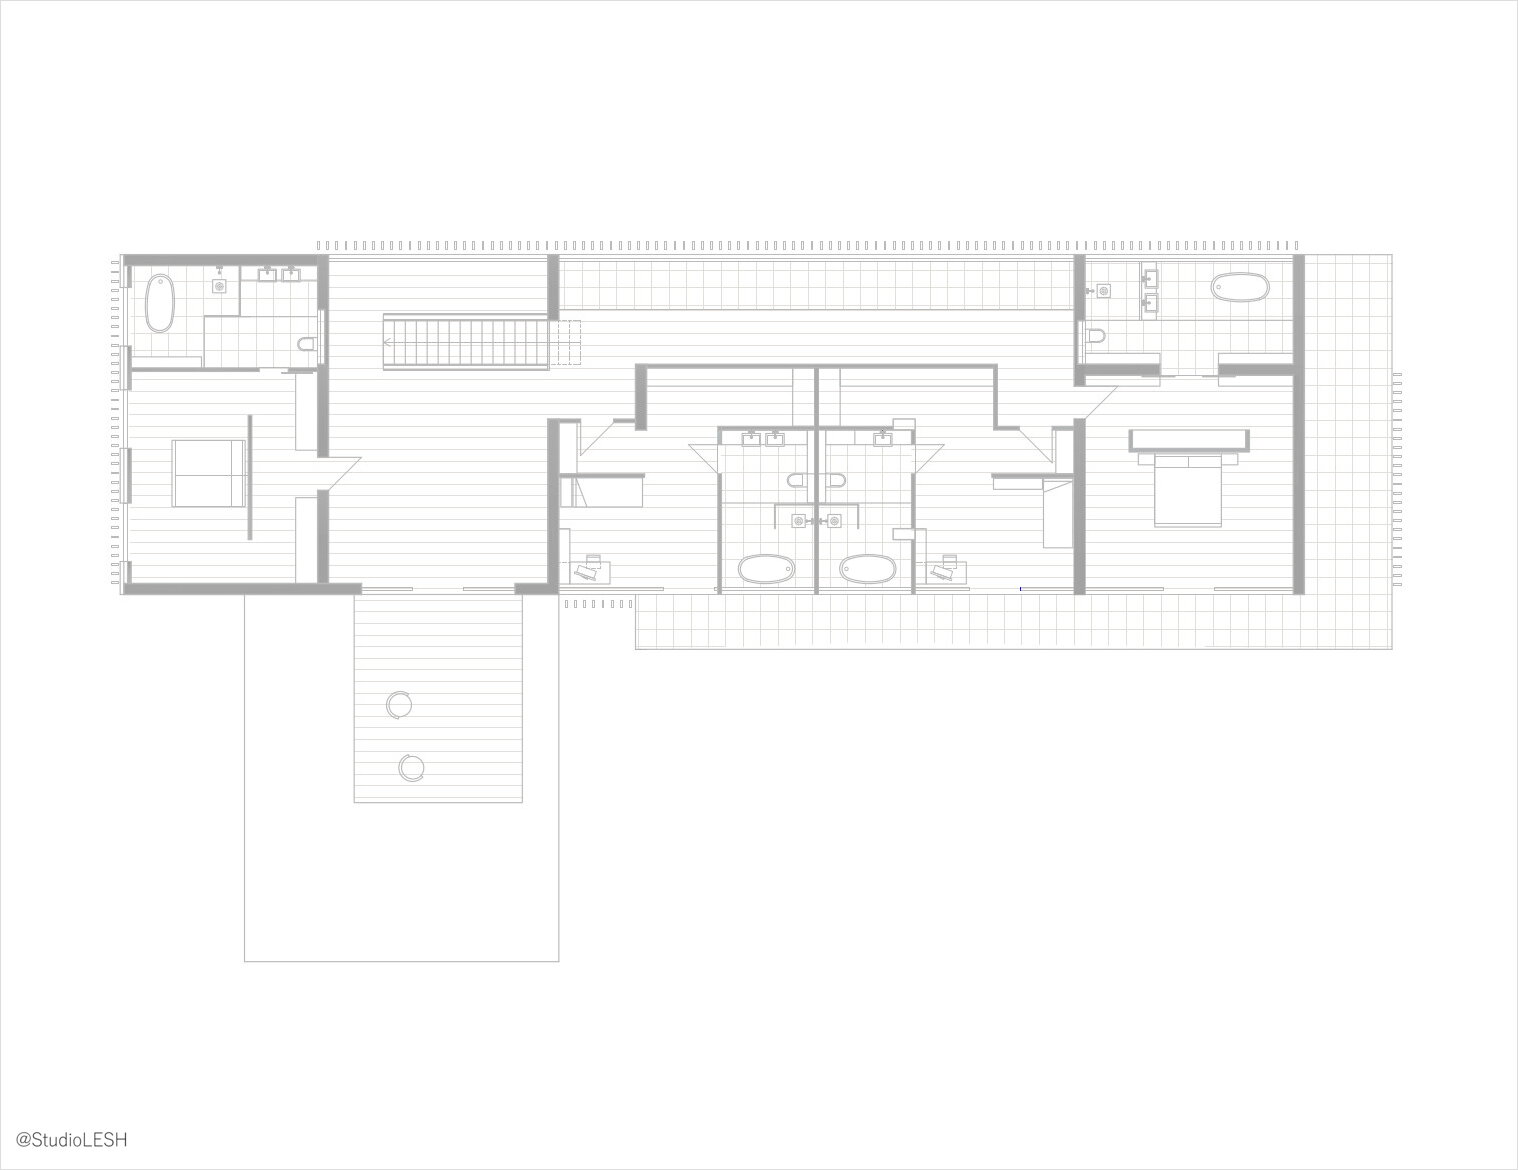 The layout of the house in Germany